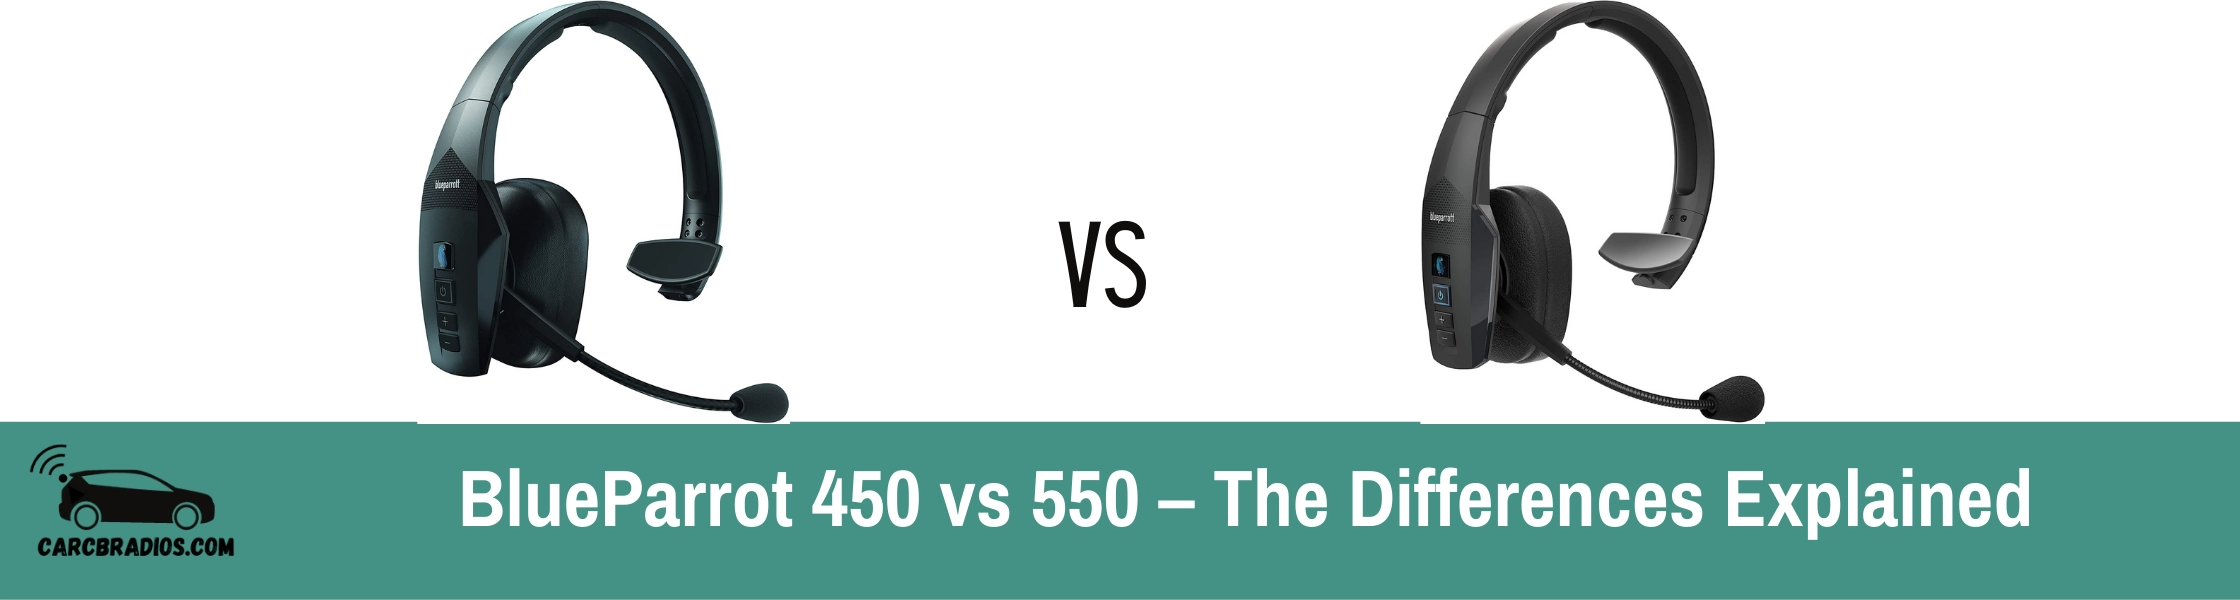 BlueParrot 450 vs 550 – The Differences Explained: The biggest difference between the BlueParrot 450 XT & the 550 XT is that the 550 is slightly heavier due to the additional padding found in the ear cushions and headband.